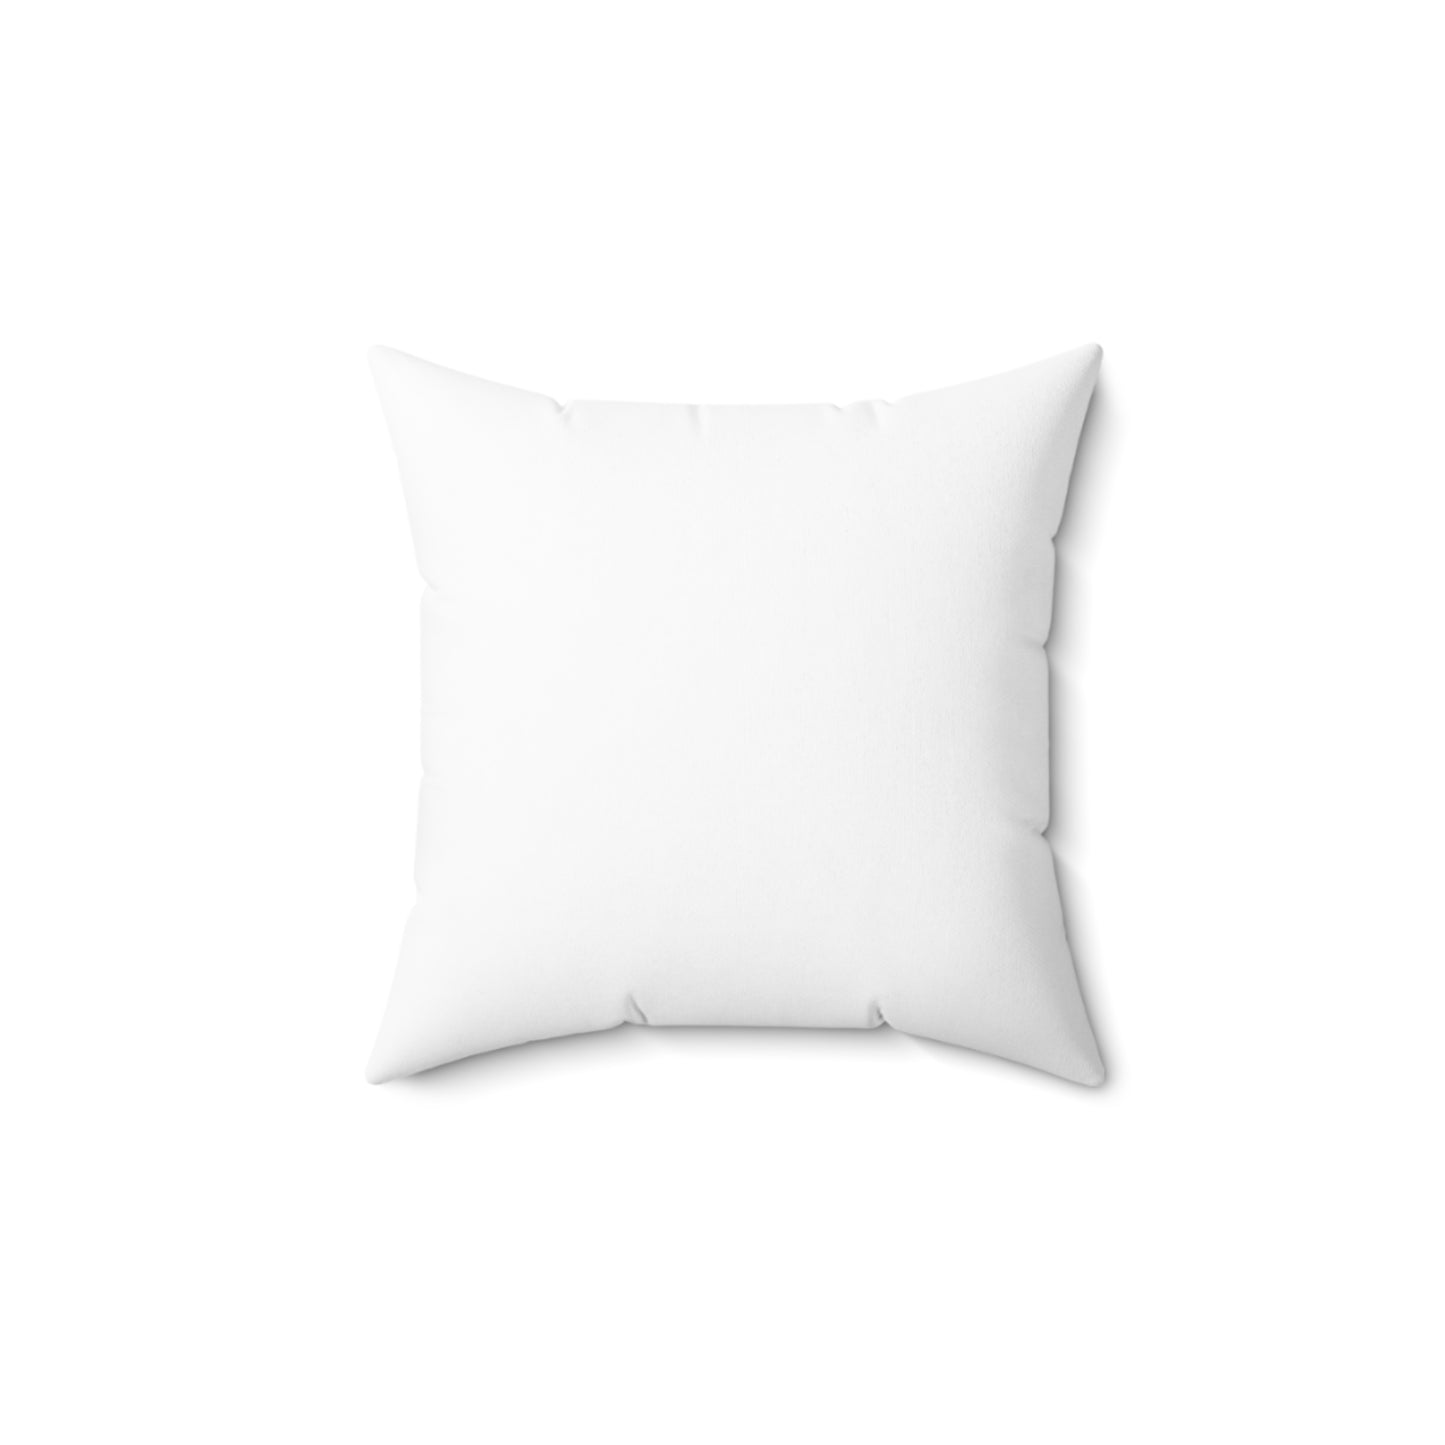 V-DAY HEARTS Square Pillow